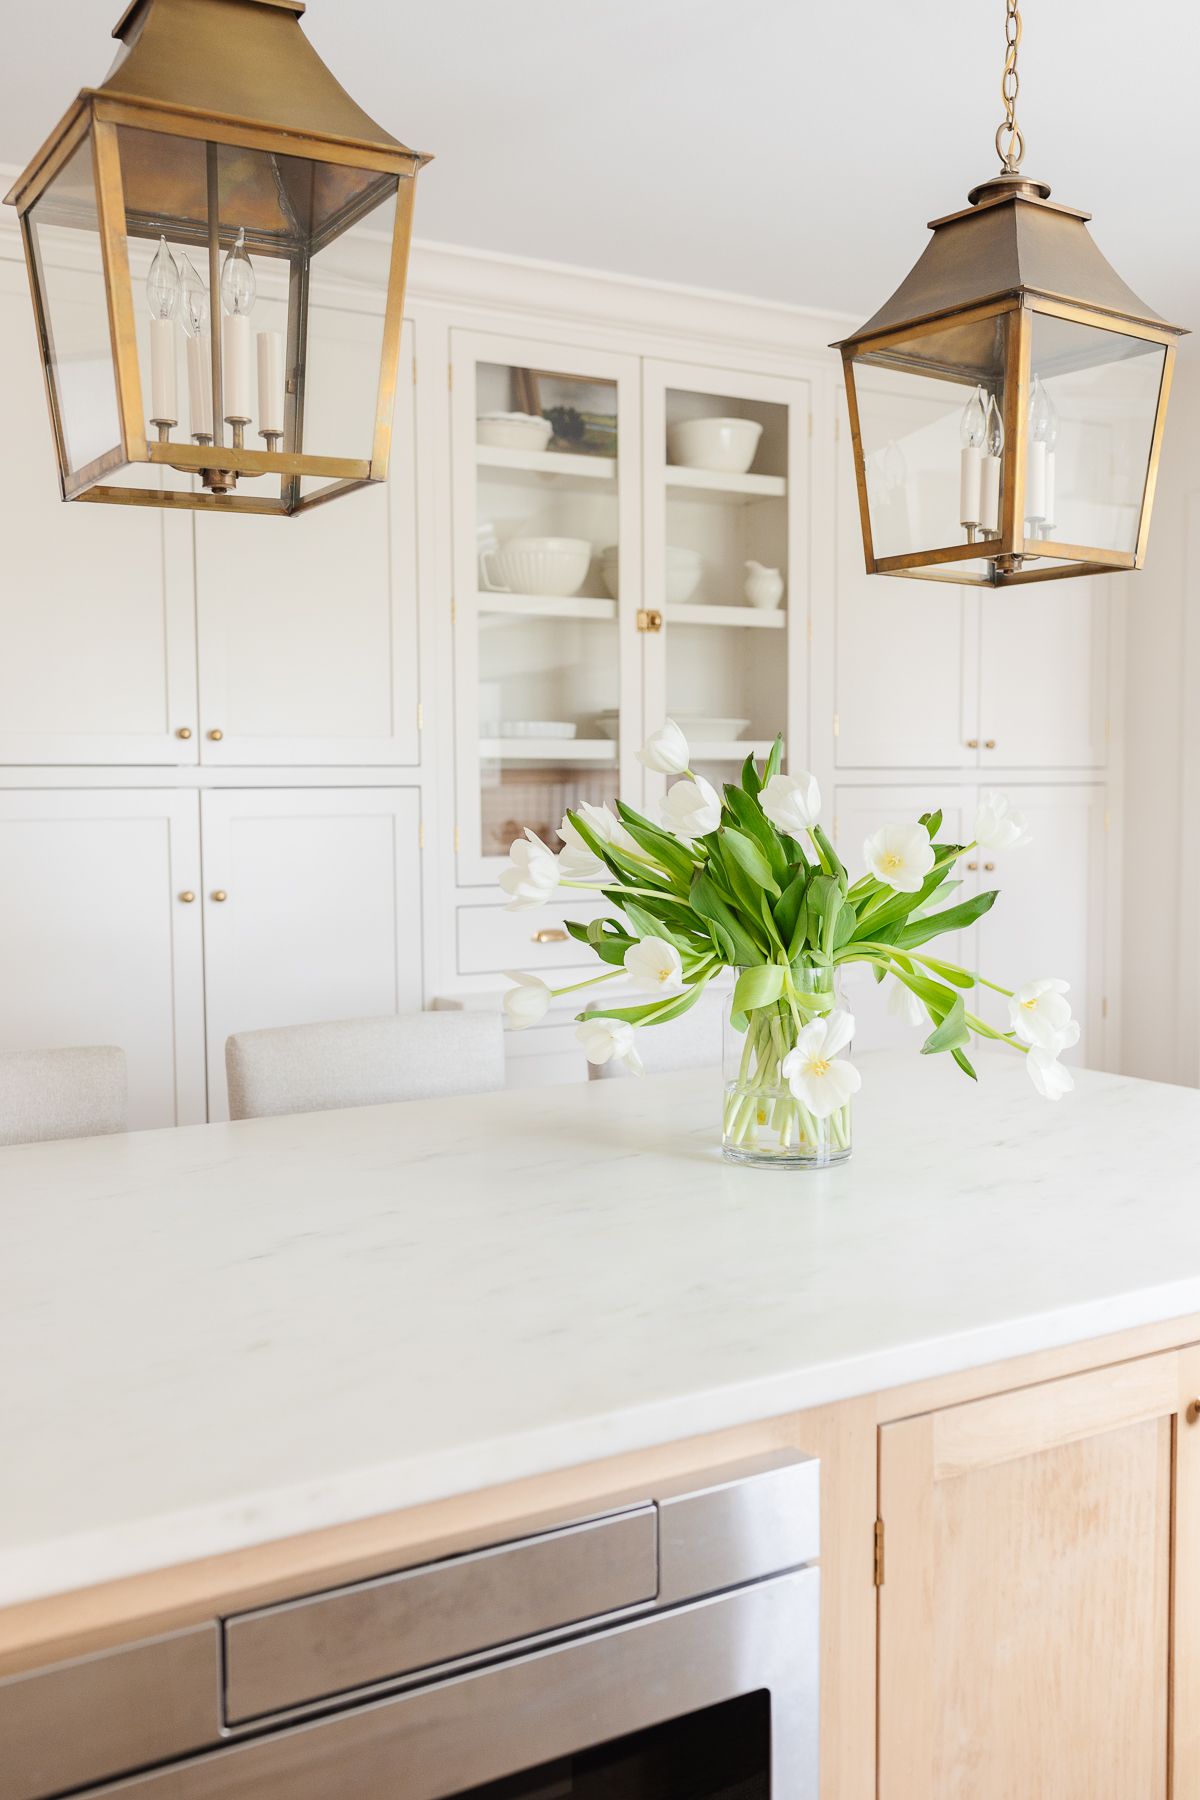 Two brass lantern pendants hanging over a kitchen island